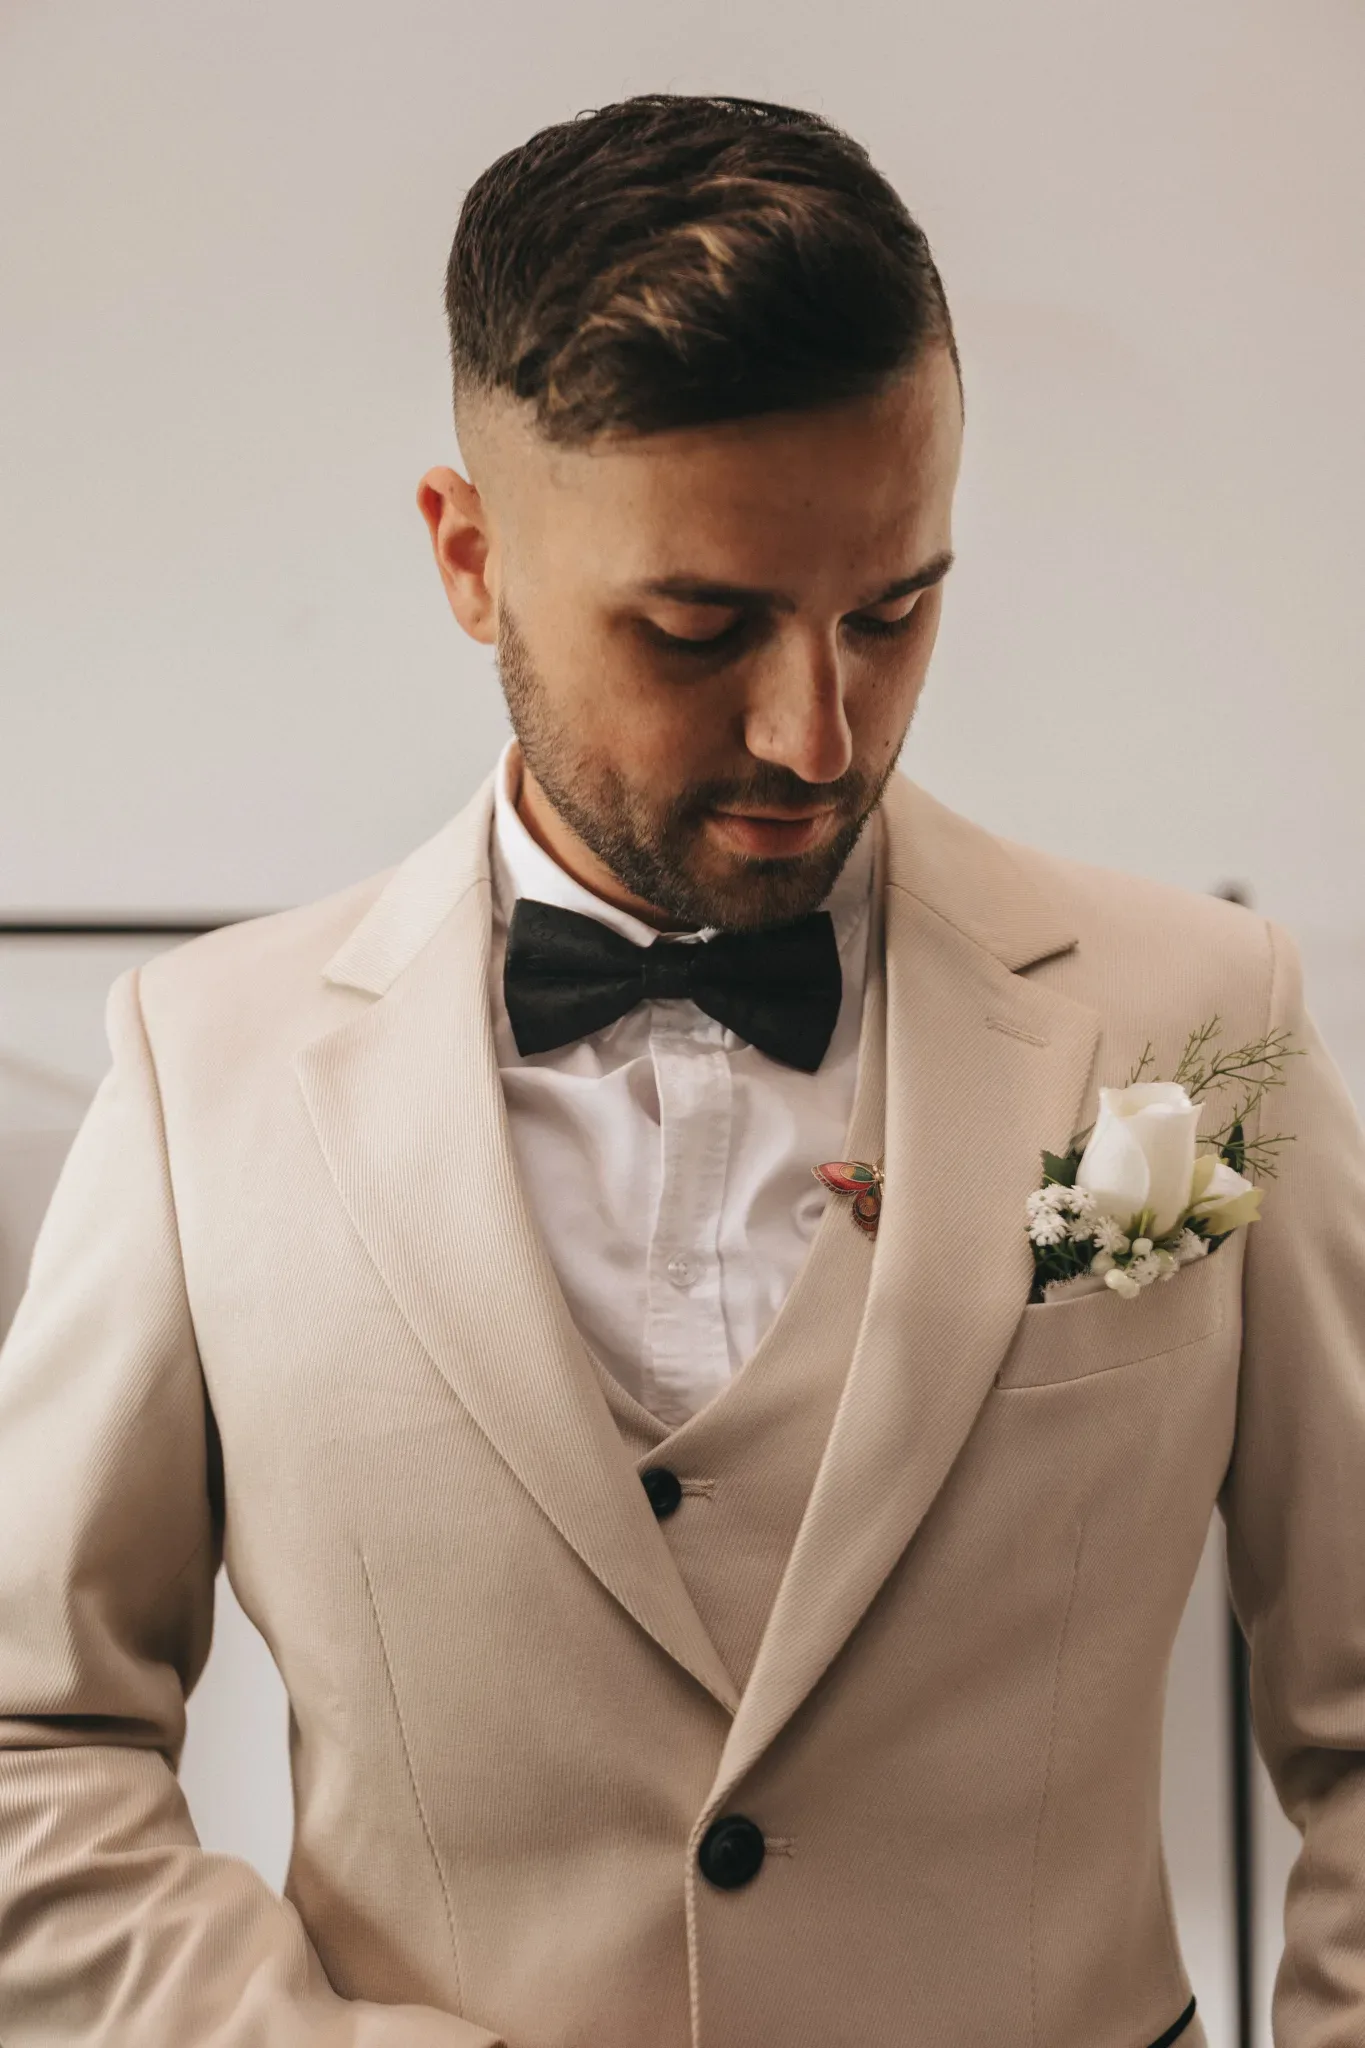 A man in a beige suit with a black bow tie and boutonniere looks downward, his expression thoughtful. close up captures elegant details of his stylish haircut and formal attire.